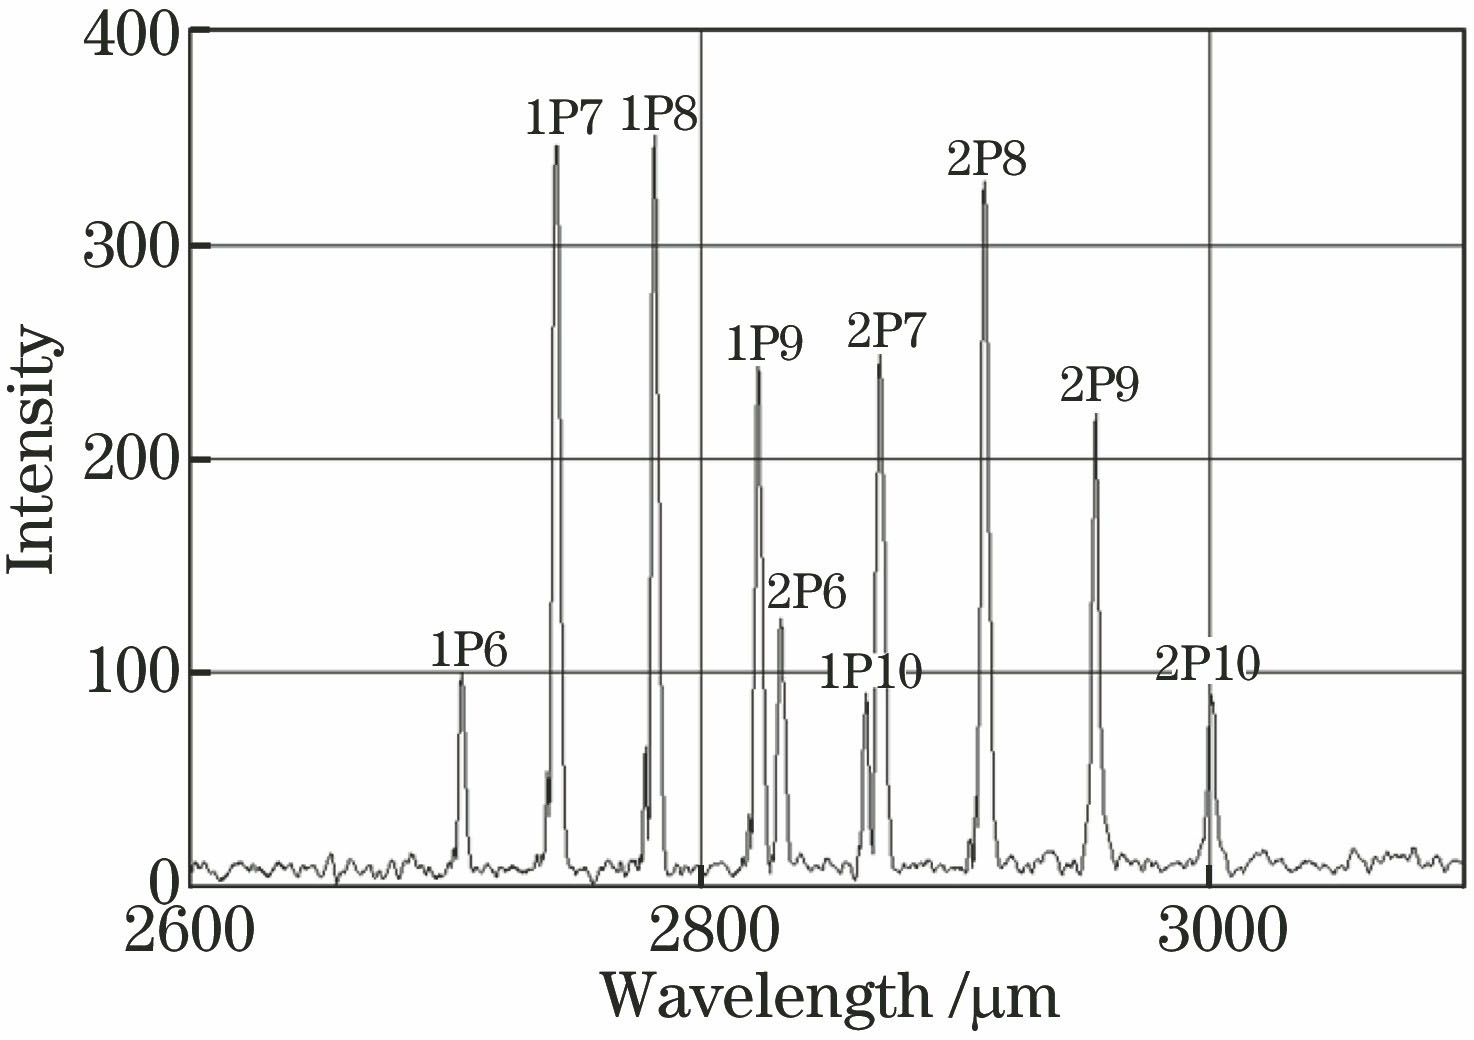 Measured spectrum of HF laser in the non-stable cavity condition